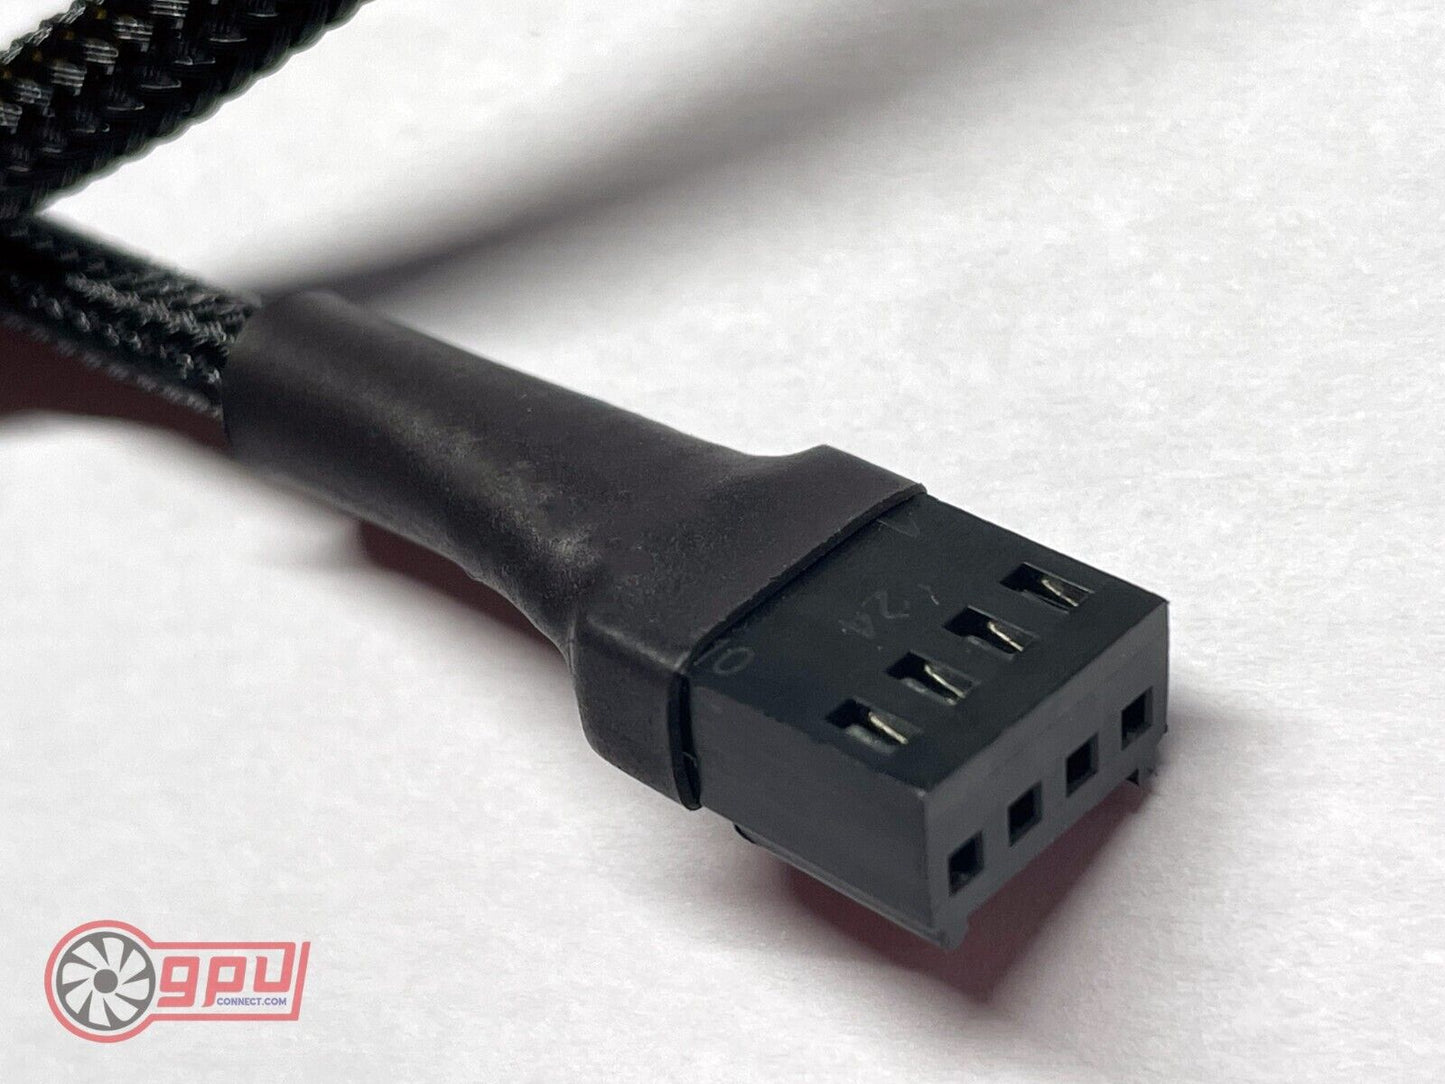 PREMIUM Long 4 Pin PWM Fan Extension Cable CPU GPU male to female (Braided) 50cm - GPUCONNECT.COM